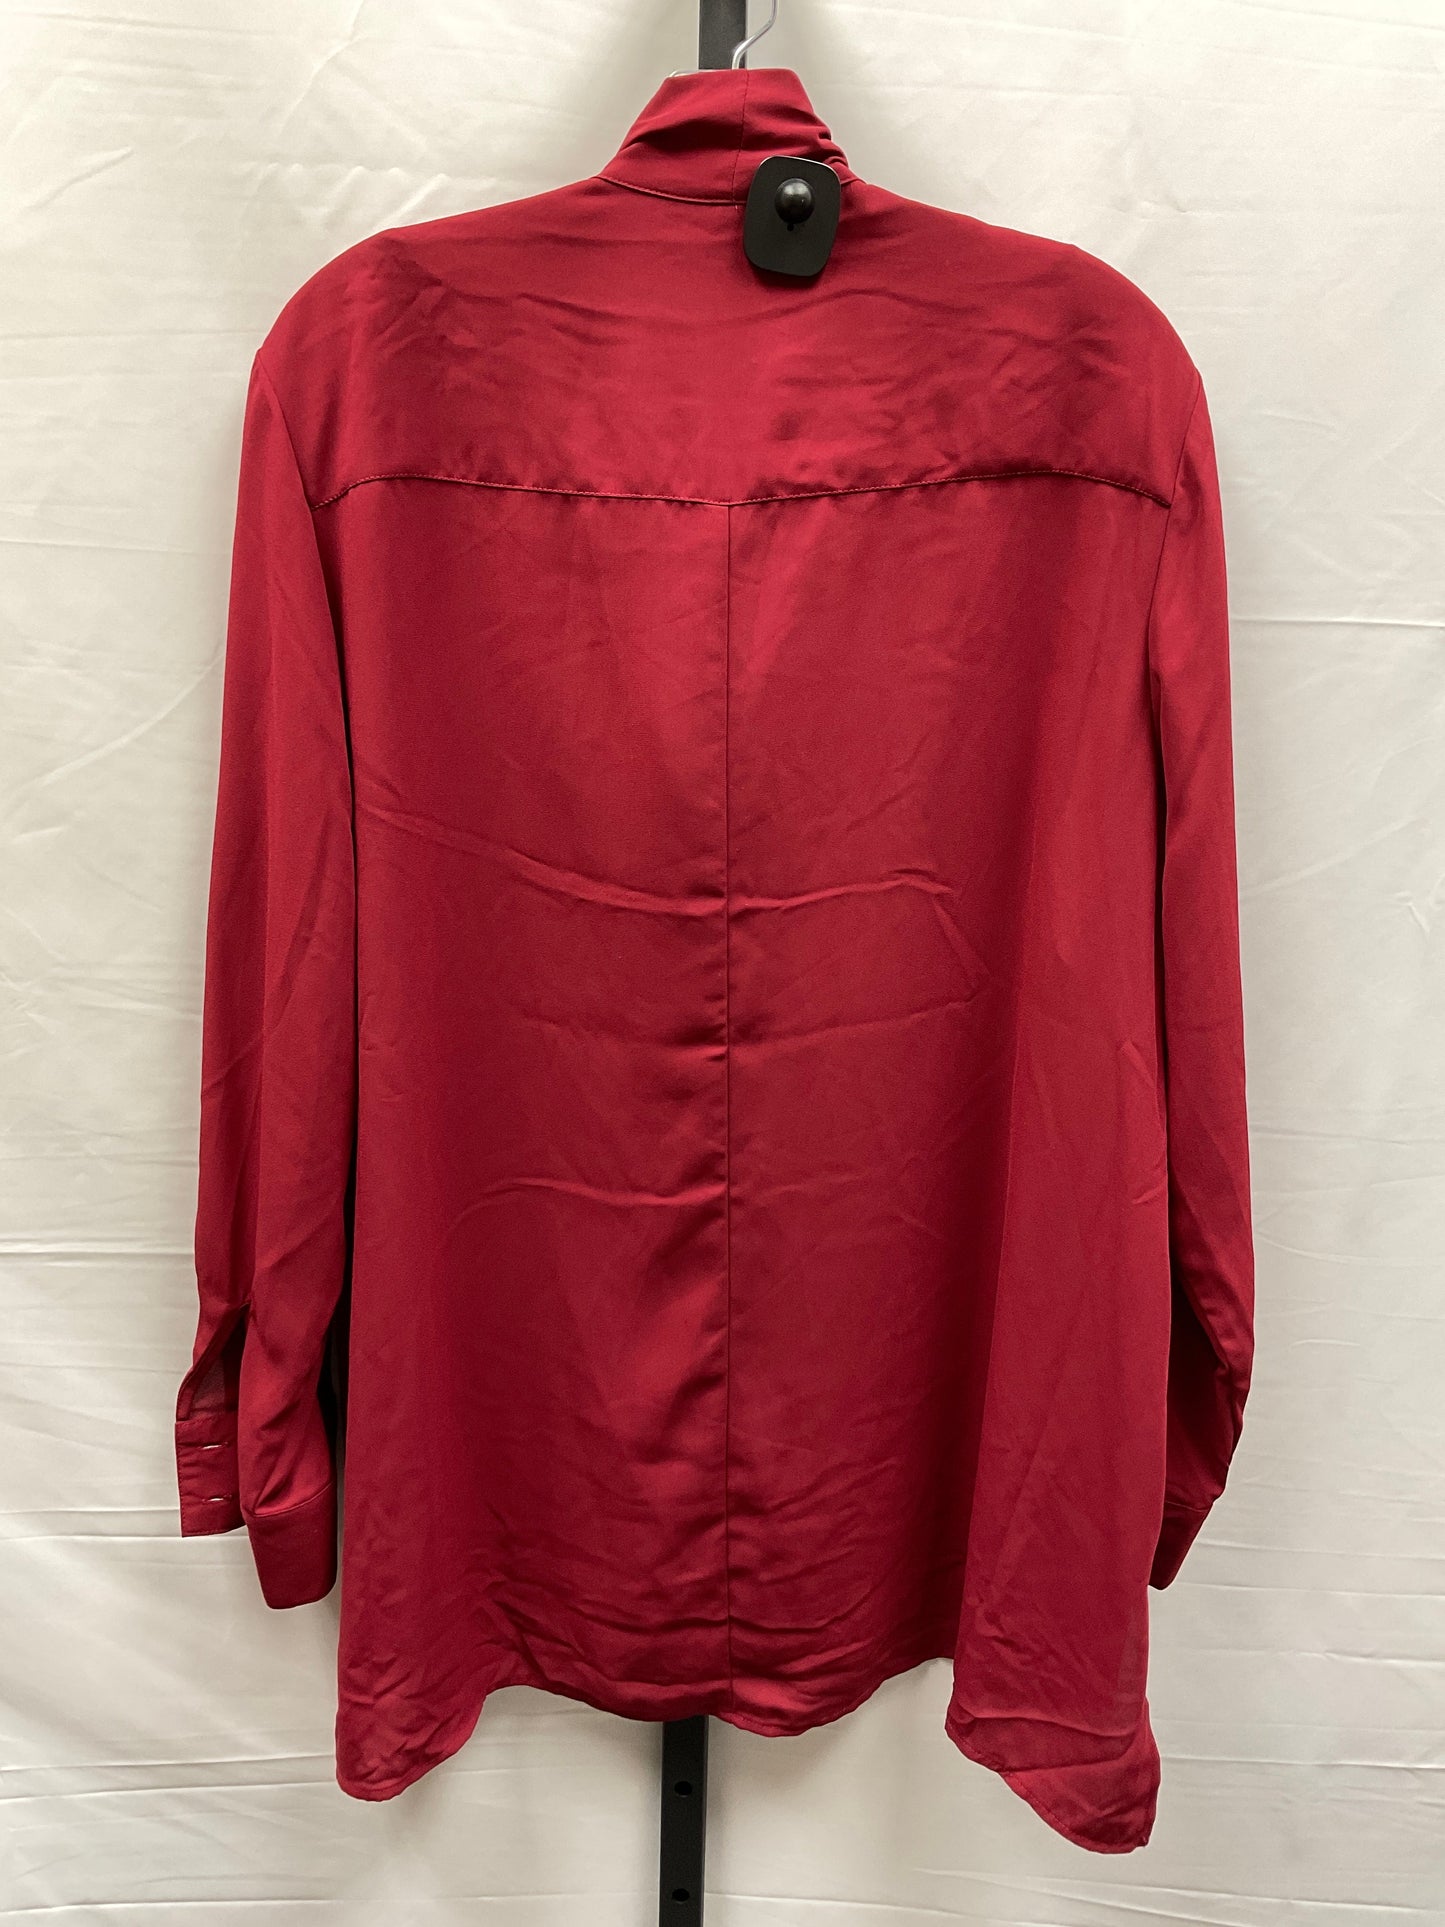 Red Top Long Sleeve Cato, Size 1x